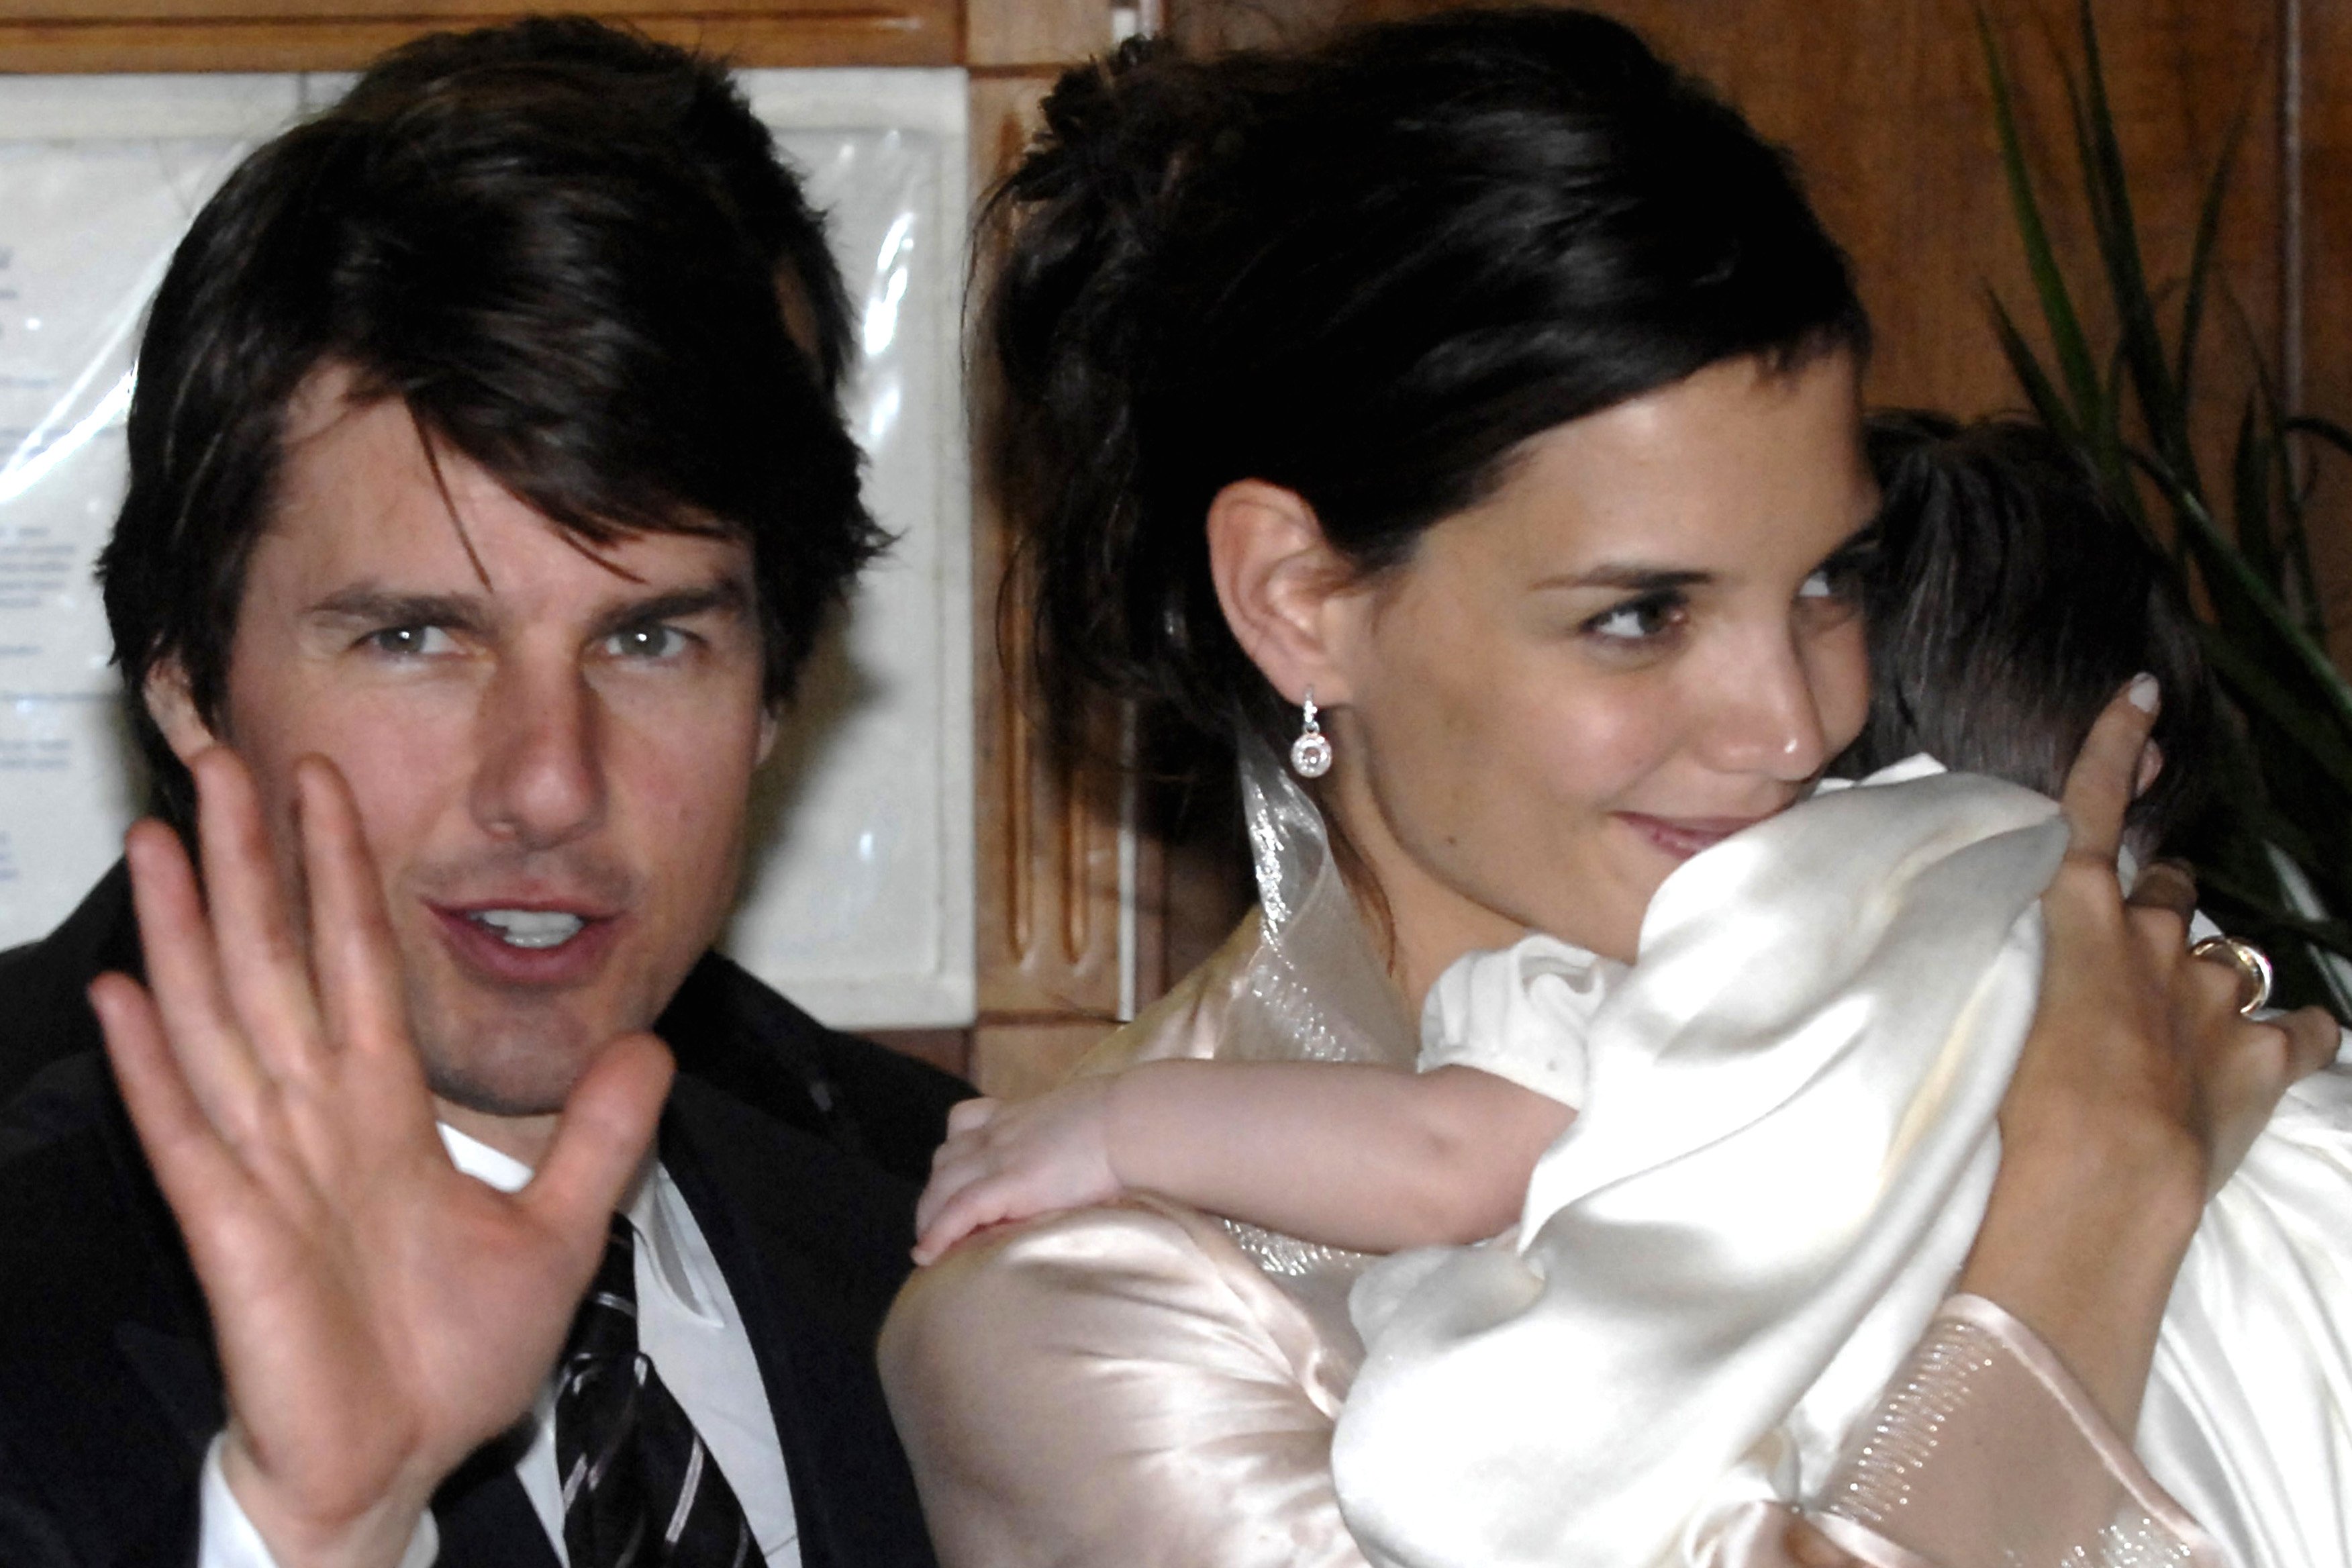 Katie Holmes, Tom Cruise, and baby Suri at their pre-wedding dinner at "Nino's" restaurant, Rome in 2006. | Source: Getty Images